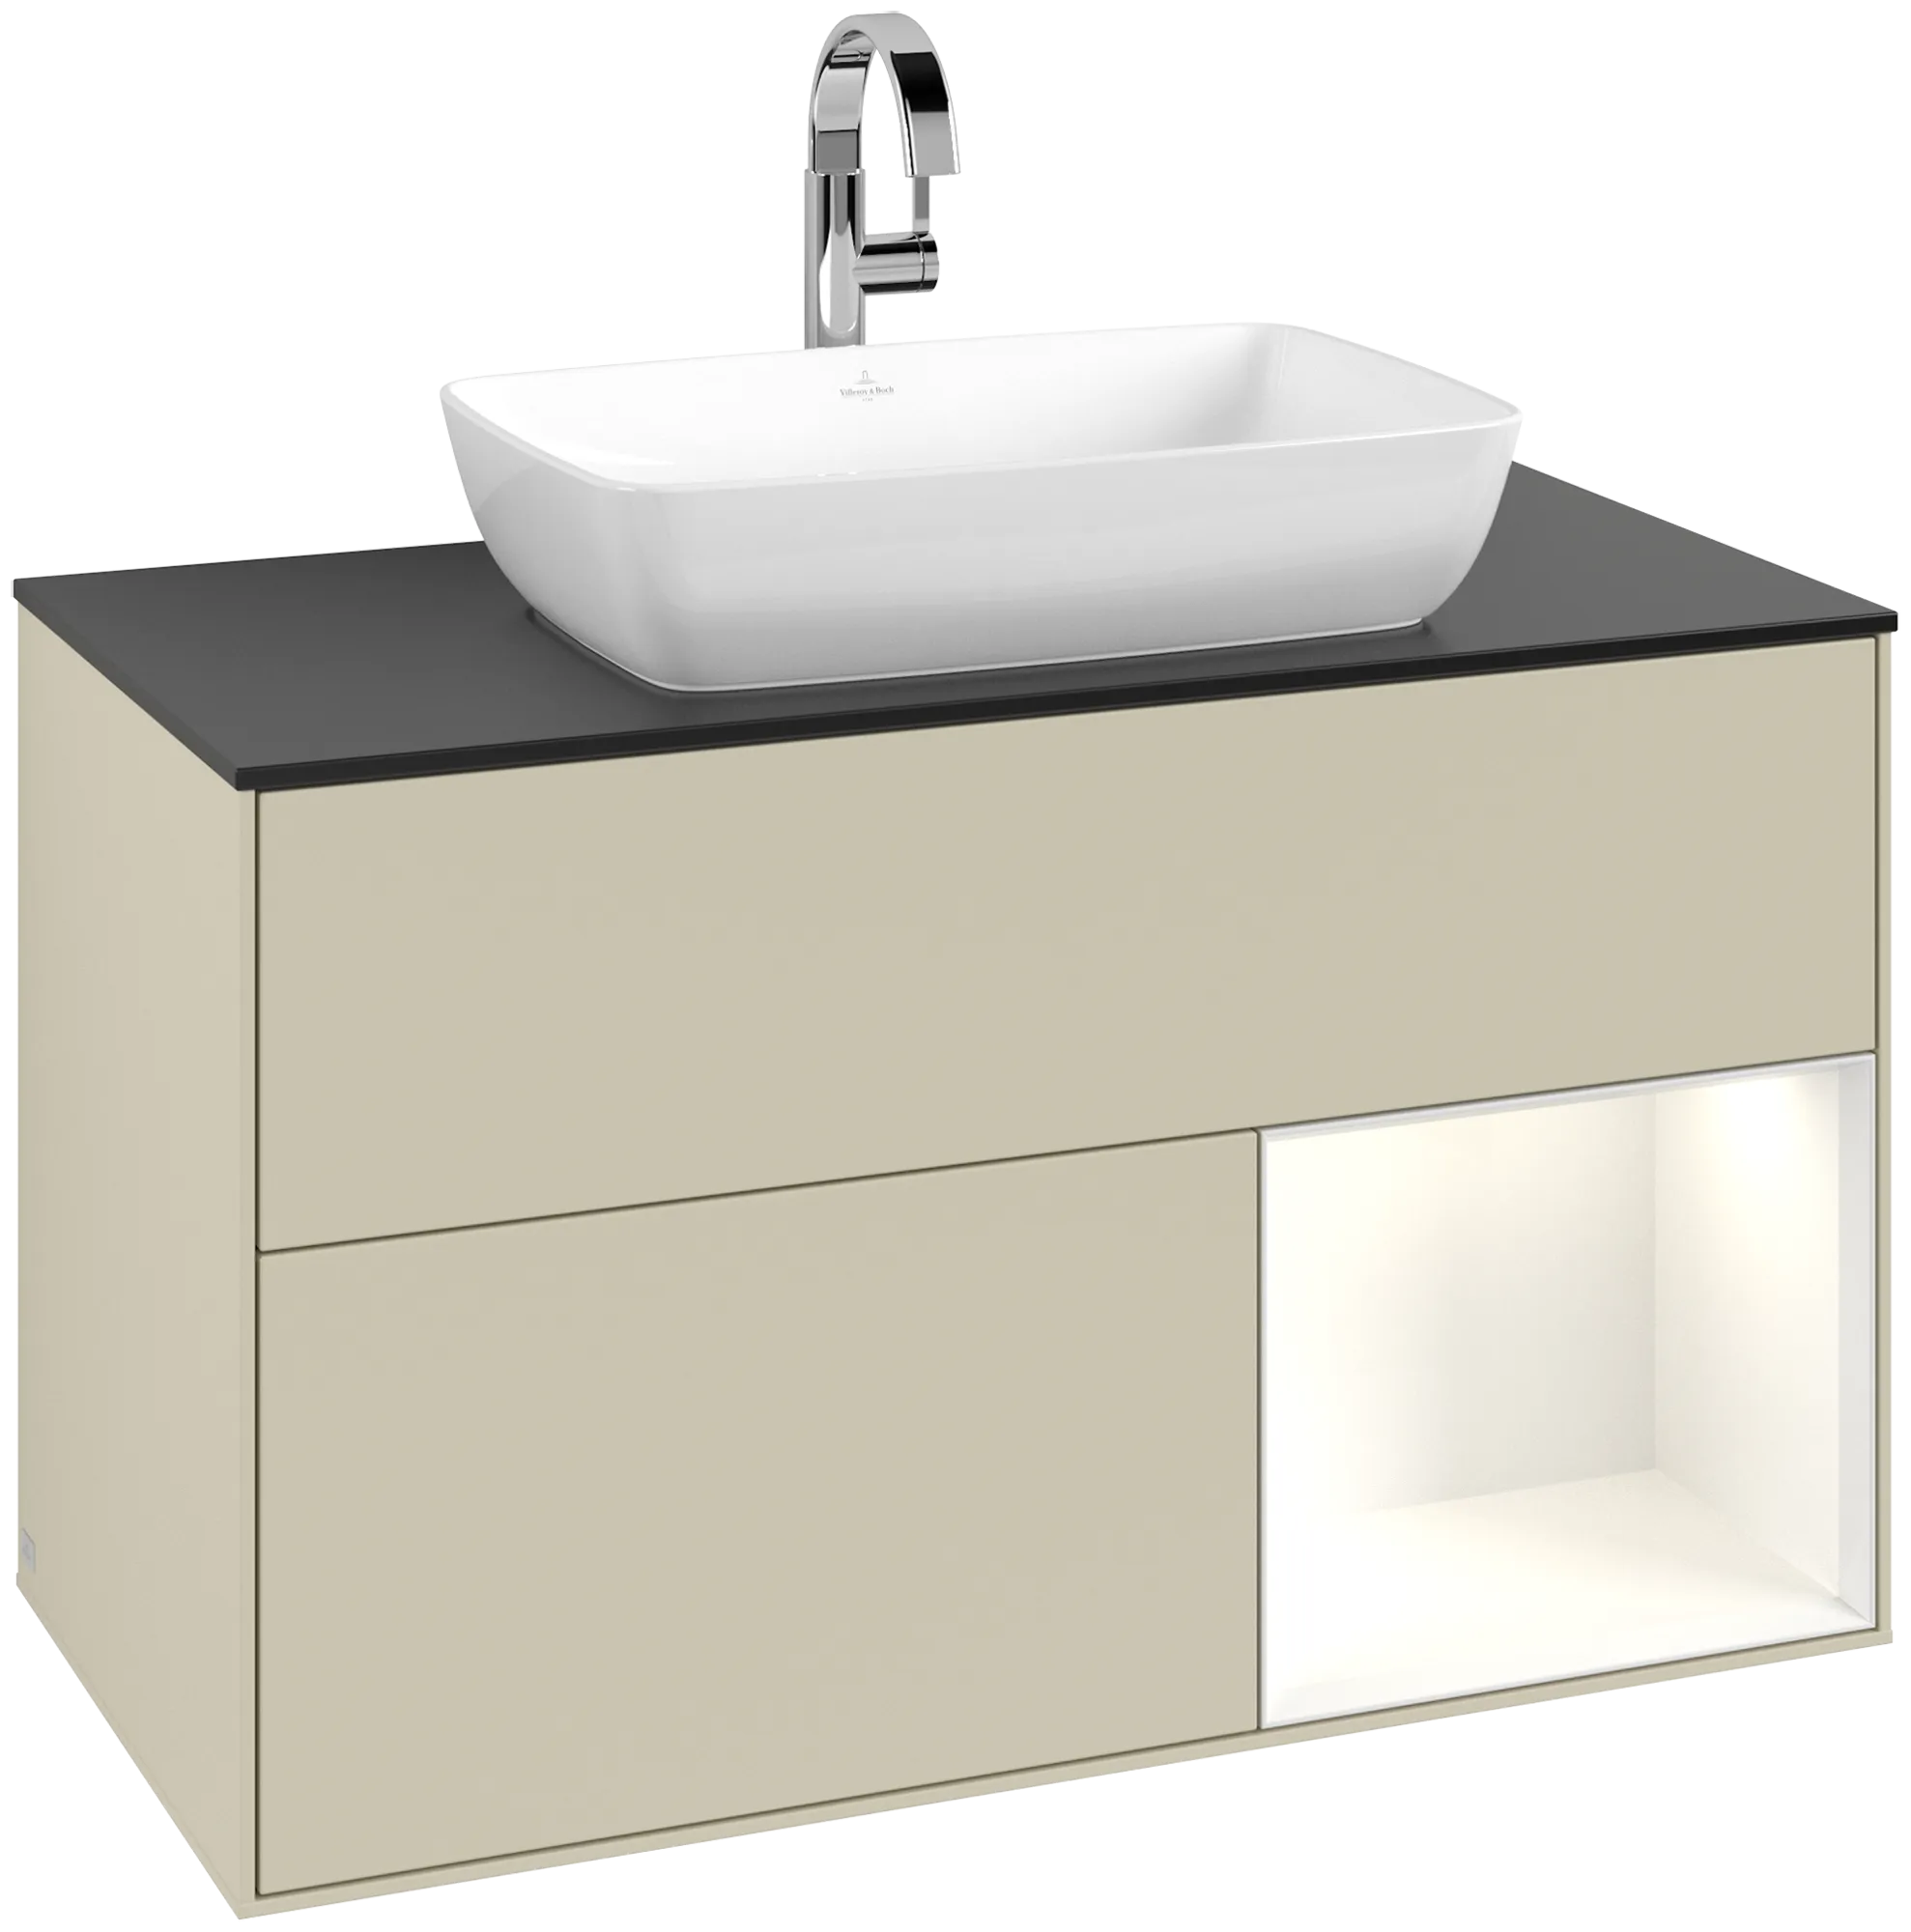 Picture of VILLEROY BOCH Finion Vanity unit, with lighting, 2 pull-out compartments, 1000 x 603 x 501 mm, Silk Grey Matt Lacquer / Glossy White Lacquer / Glass Black Matt #G782GFHJ